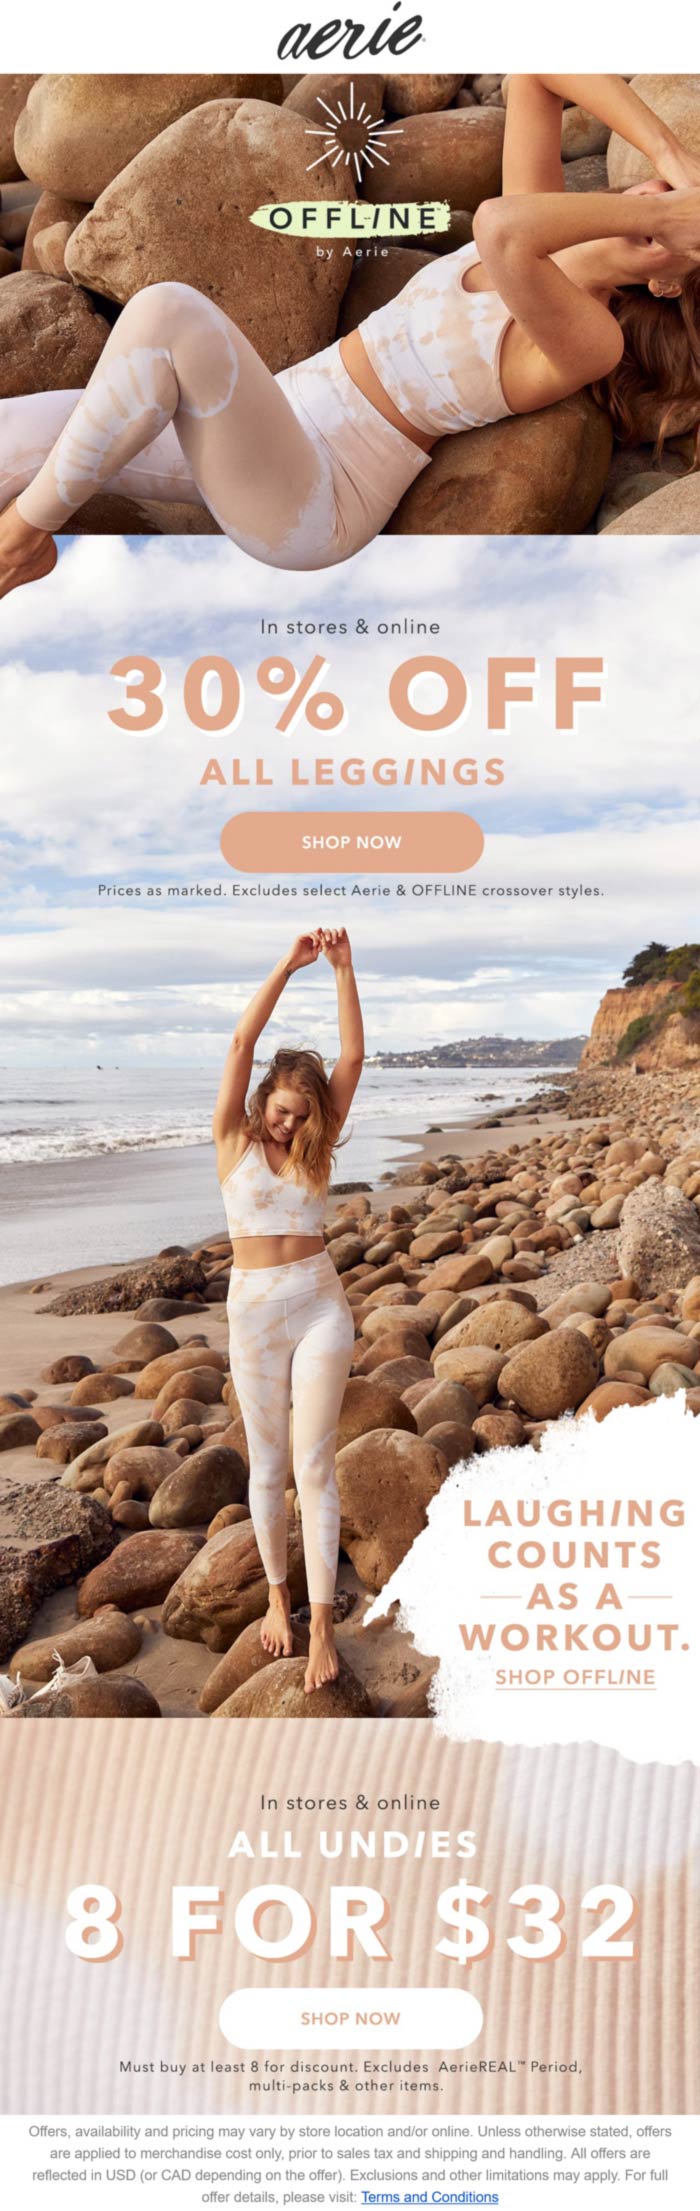 30 off all leggings at Aerie, ditto online aerie The Coupons App®